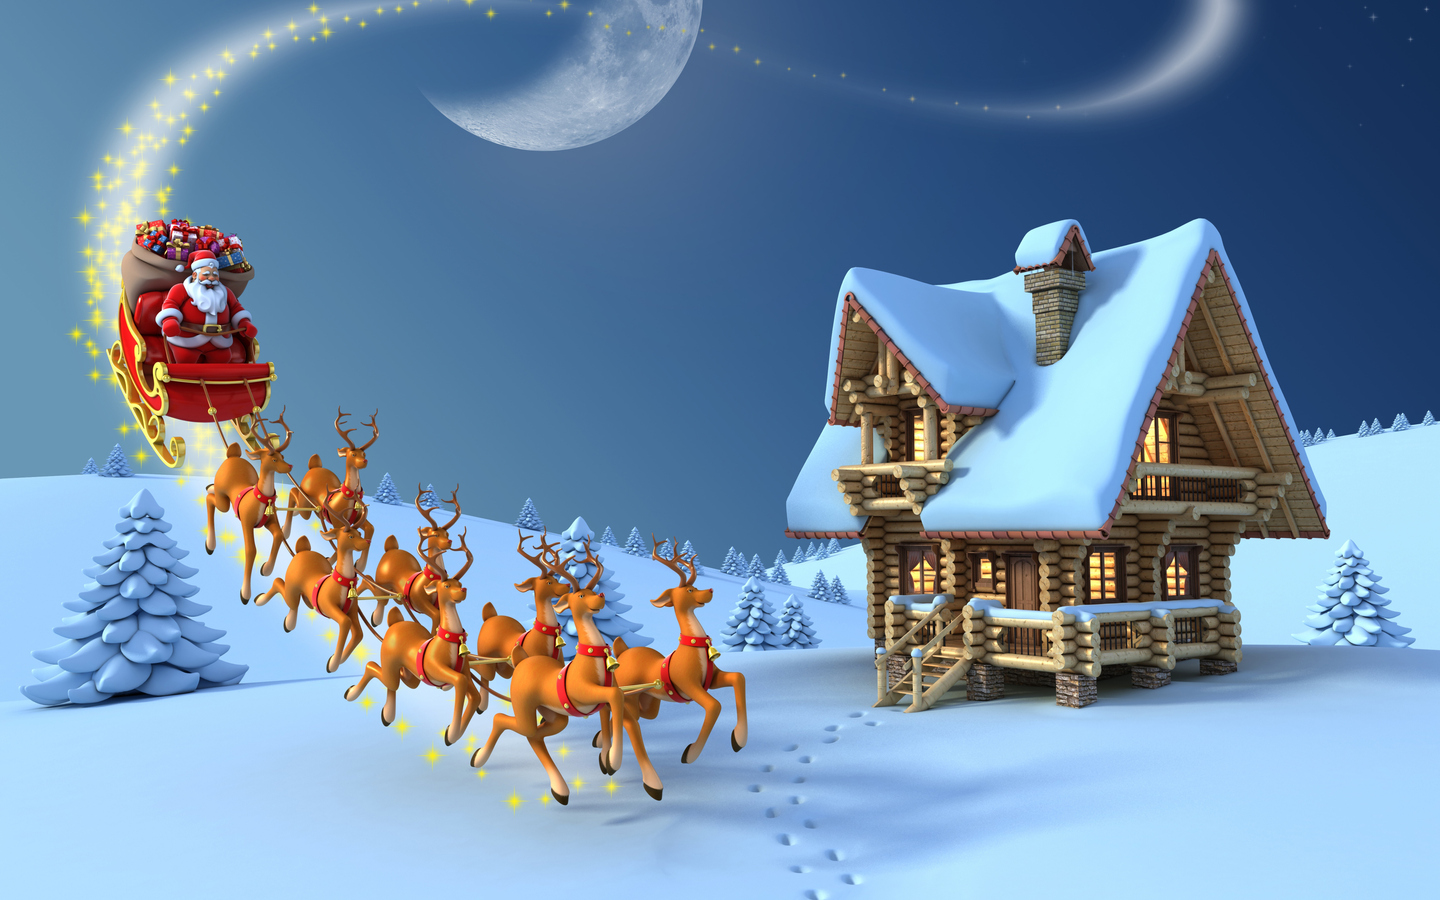 Download Santa Claus, Deer, House, Winter, New Year, Month, Freezing,  Christmas tree, Cold Wallpaper in 1440x900 Resolution